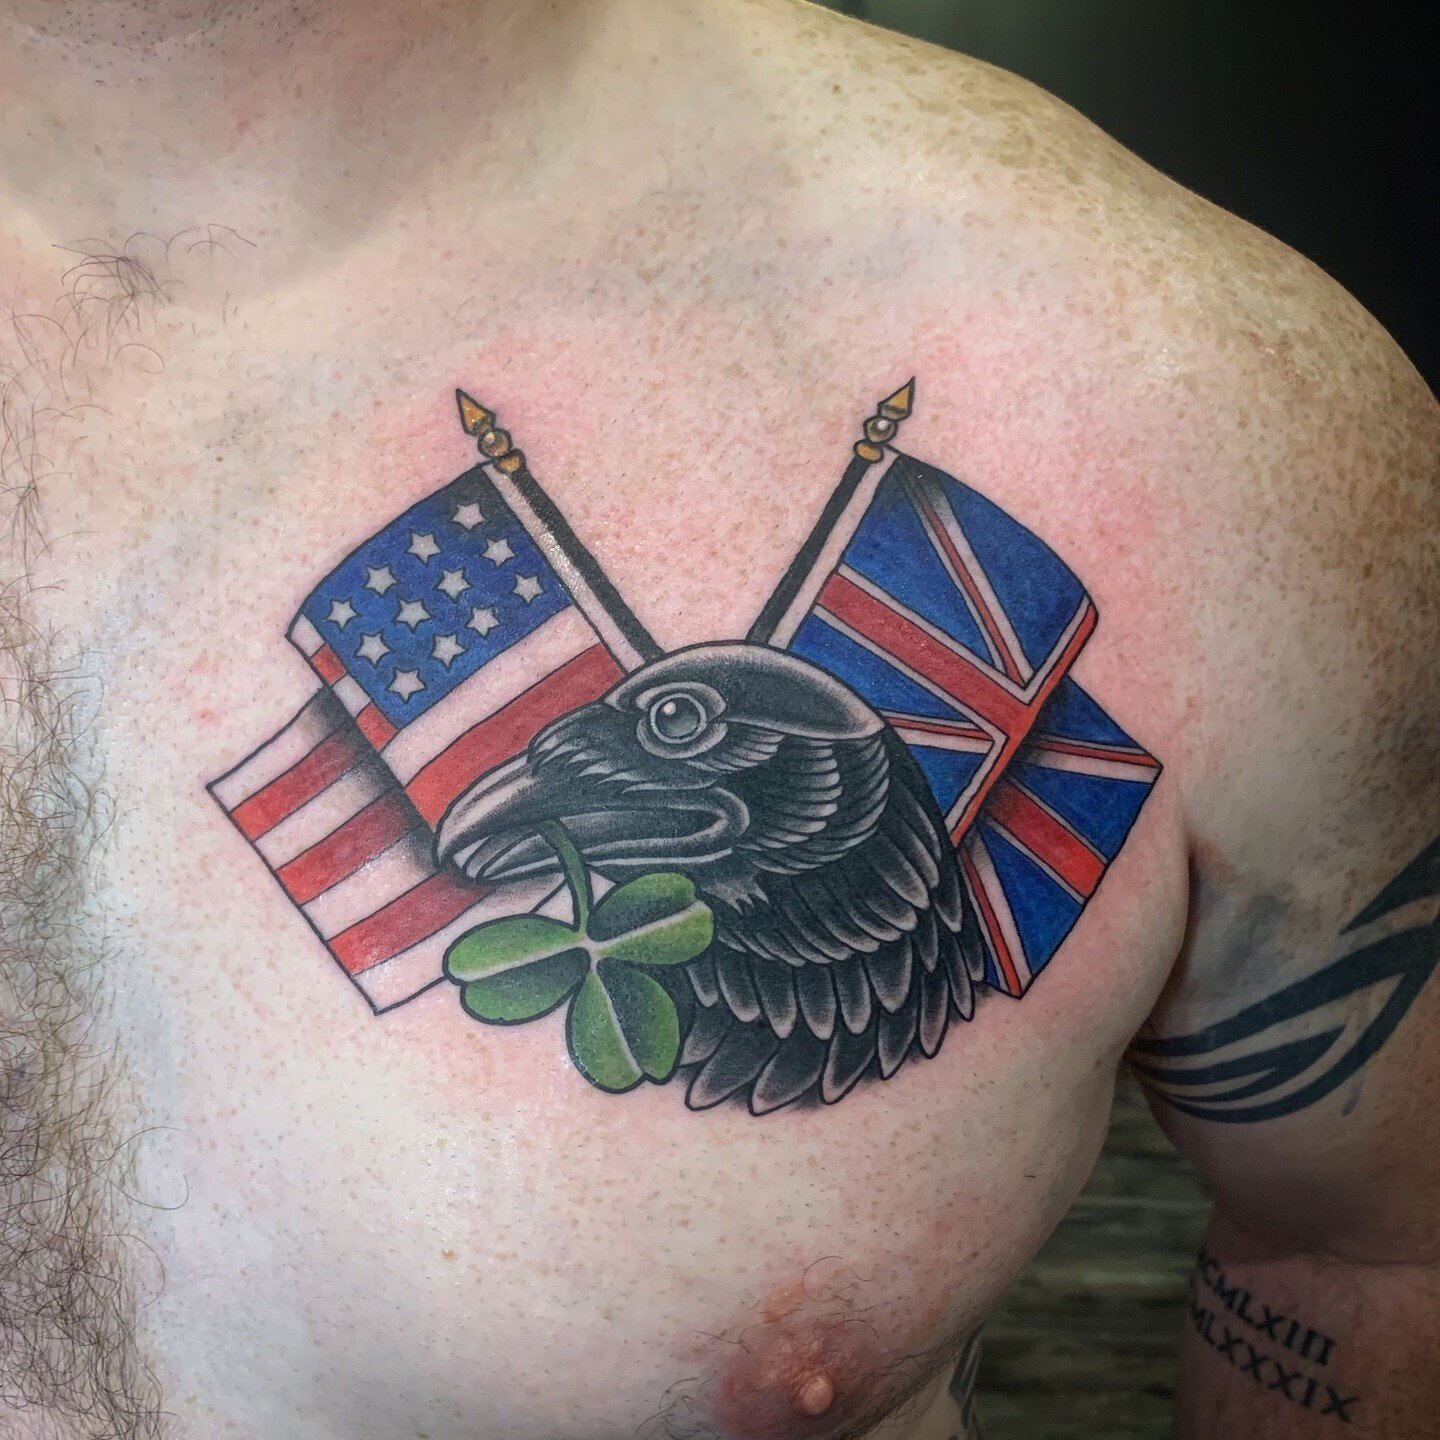 Crow, shamrock and flags for Rich. Thanks man!